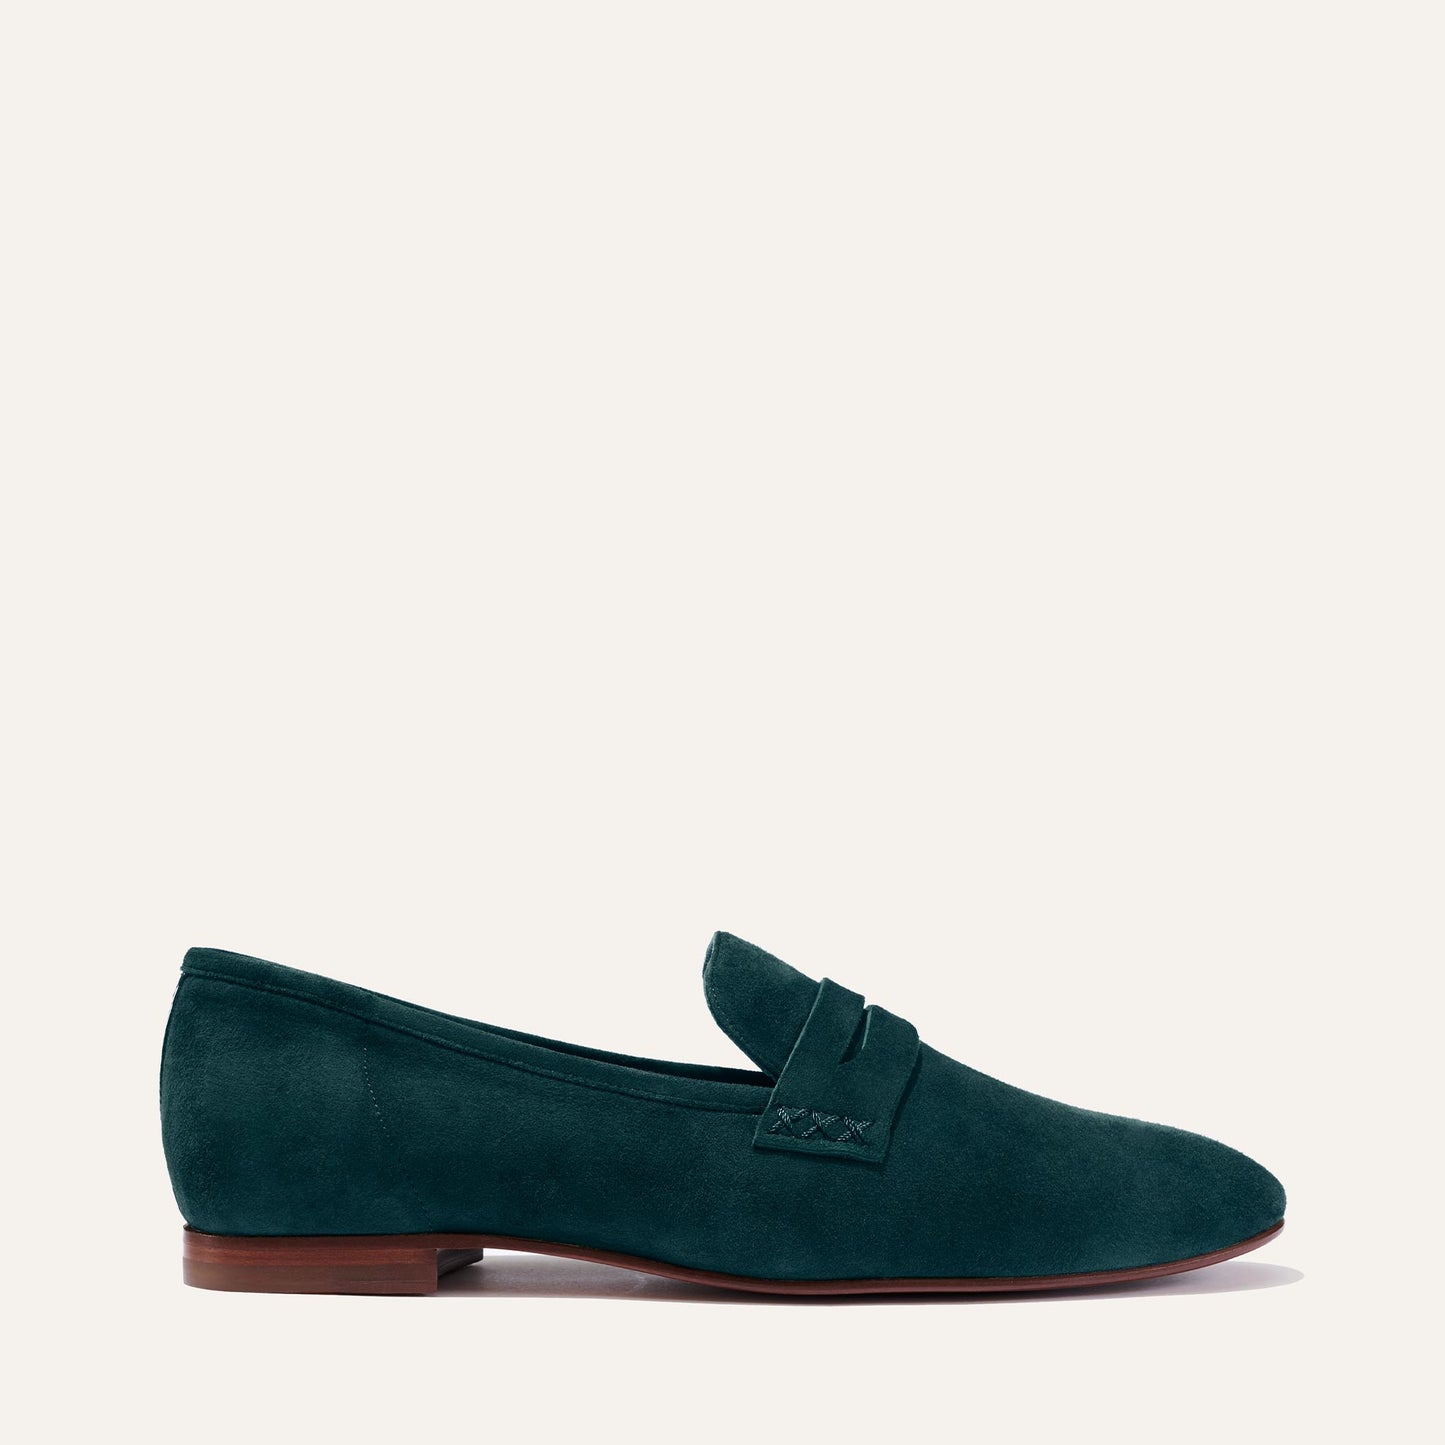 Margaux's classic and comfortable Penny loafer, made in a soft, emerald green Italian suede